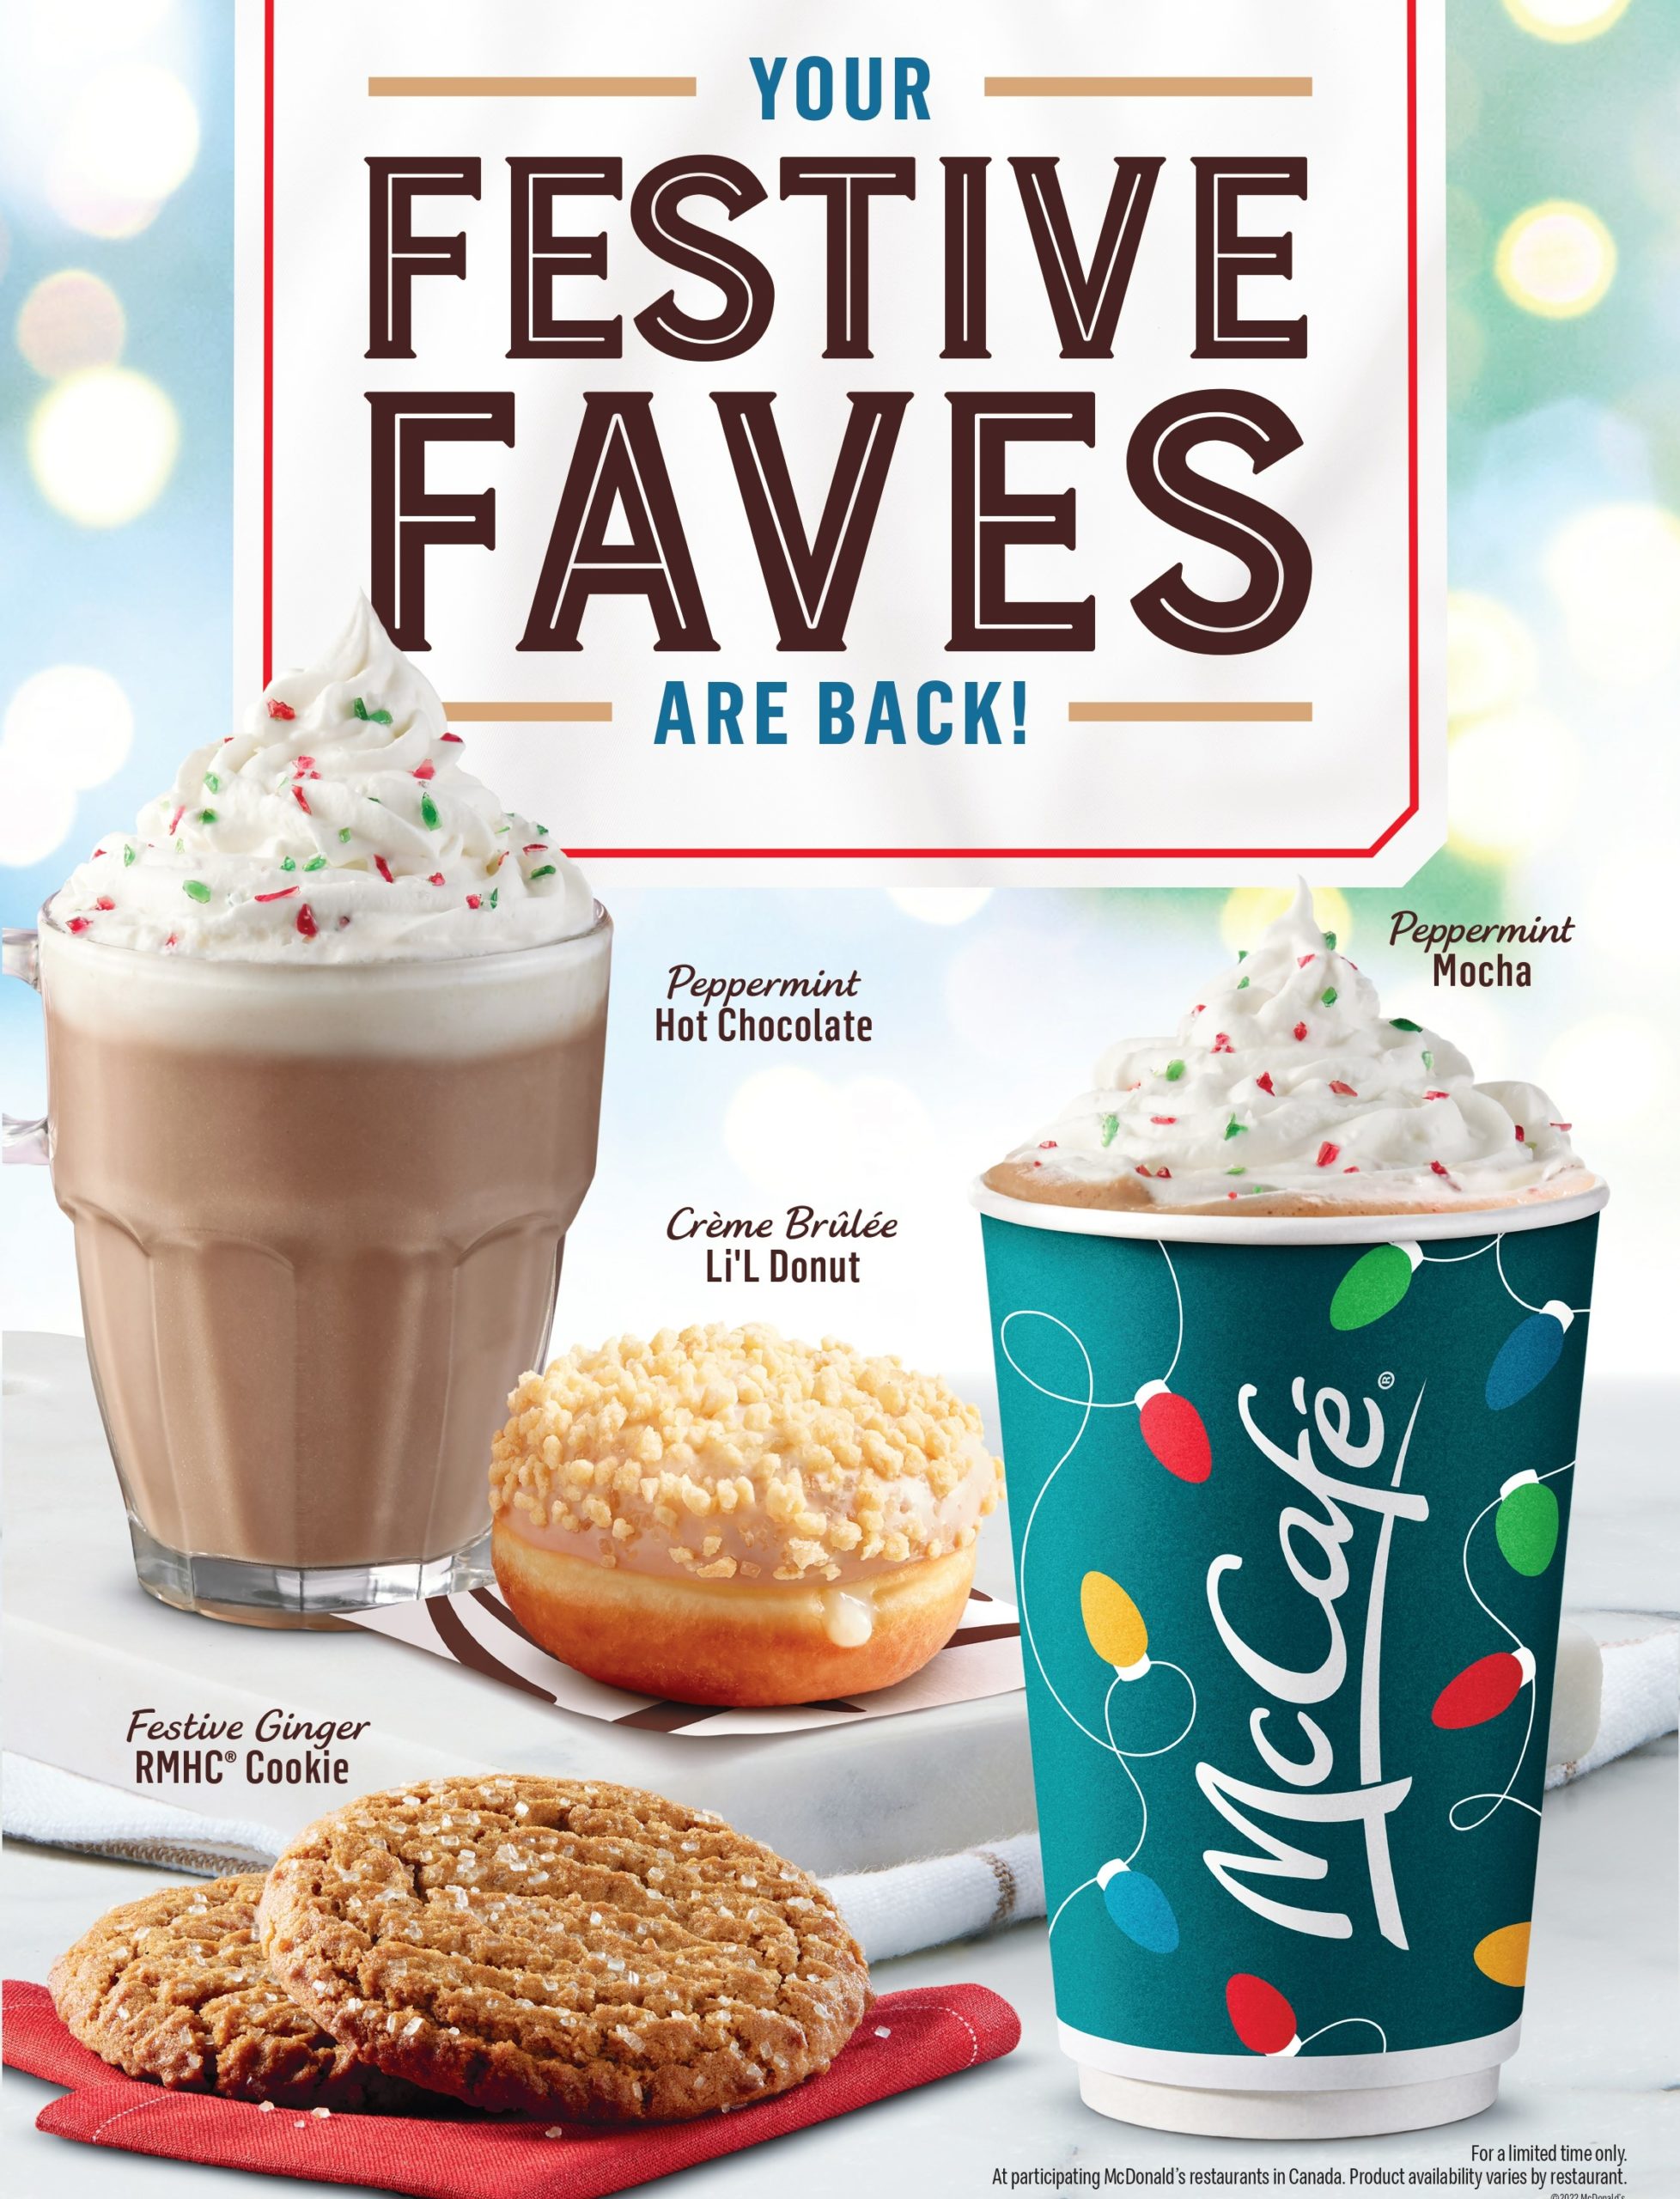 McDonald’s Canada Launches 2022 Limited Time Festive Menu for Holiday